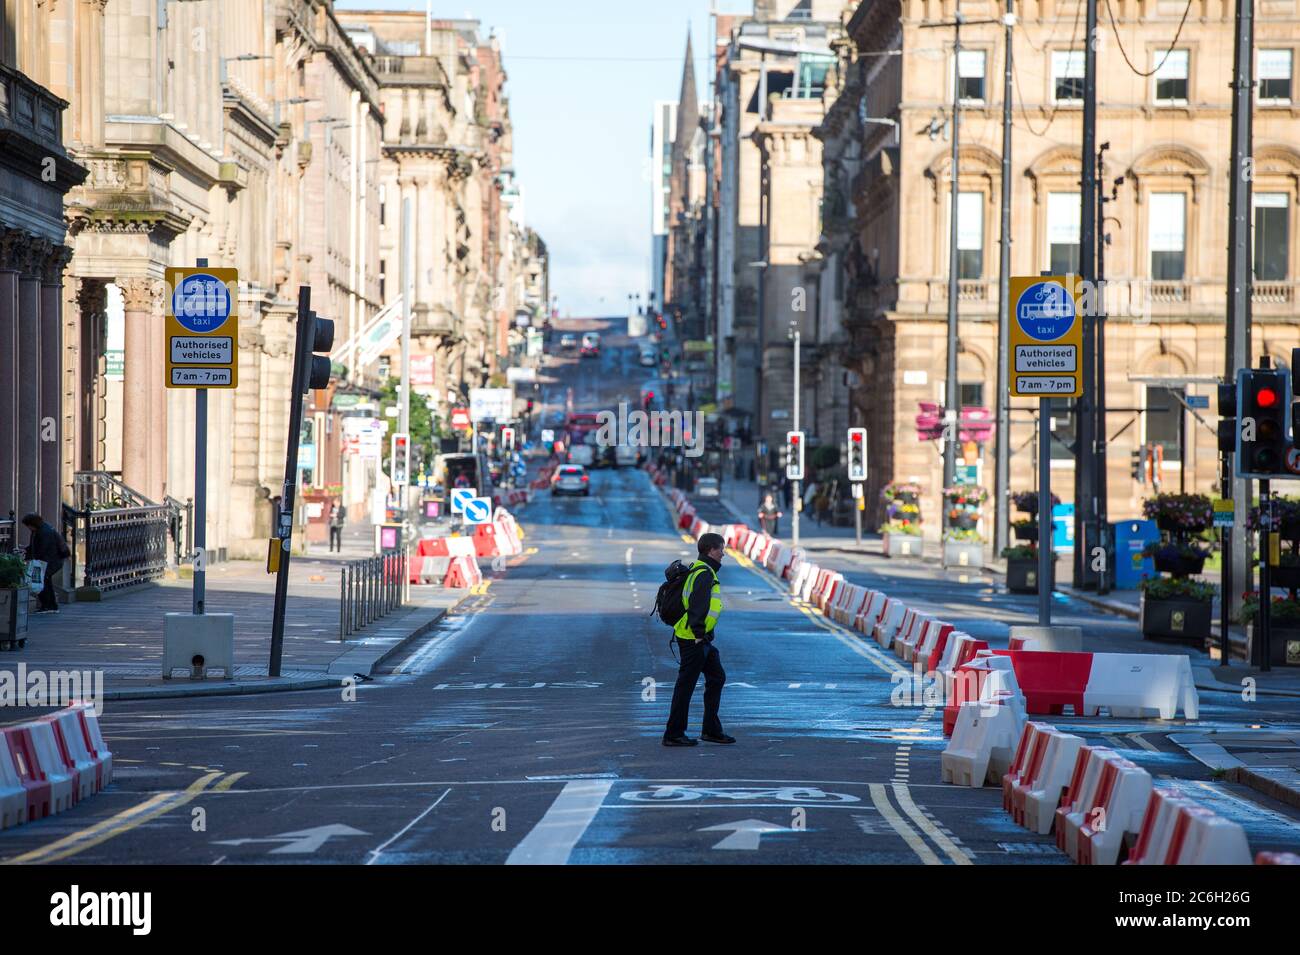 Glasgow, Scotland, UK. 10 July 2020. Pictured: George Square in Glasgow still shows signs of overnight showers, however the weather is to be bright sunshine on the day that Scotland makes all face coverings in shops mandatory.Glasgow, Scotland. Credit: Colin Fisher/Alamy Live News. Stock Photo